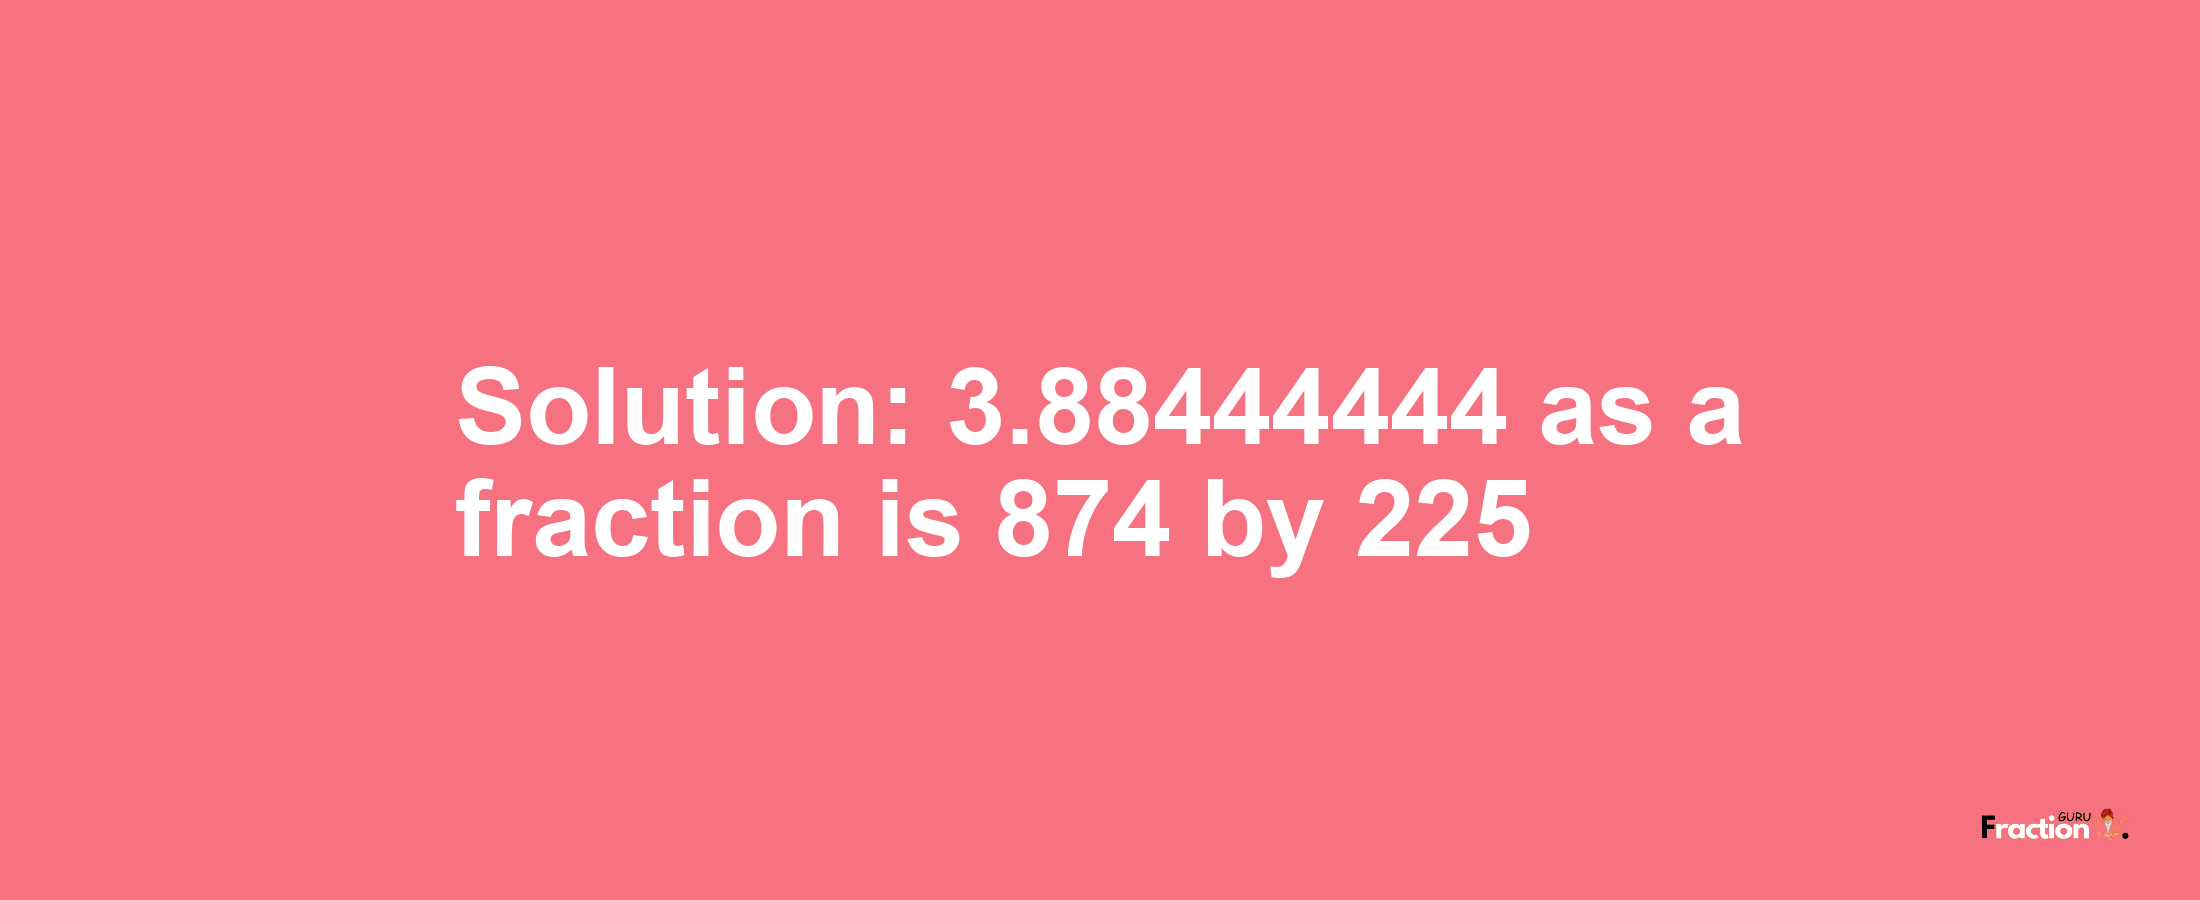 Solution:3.88444444 as a fraction is 874/225